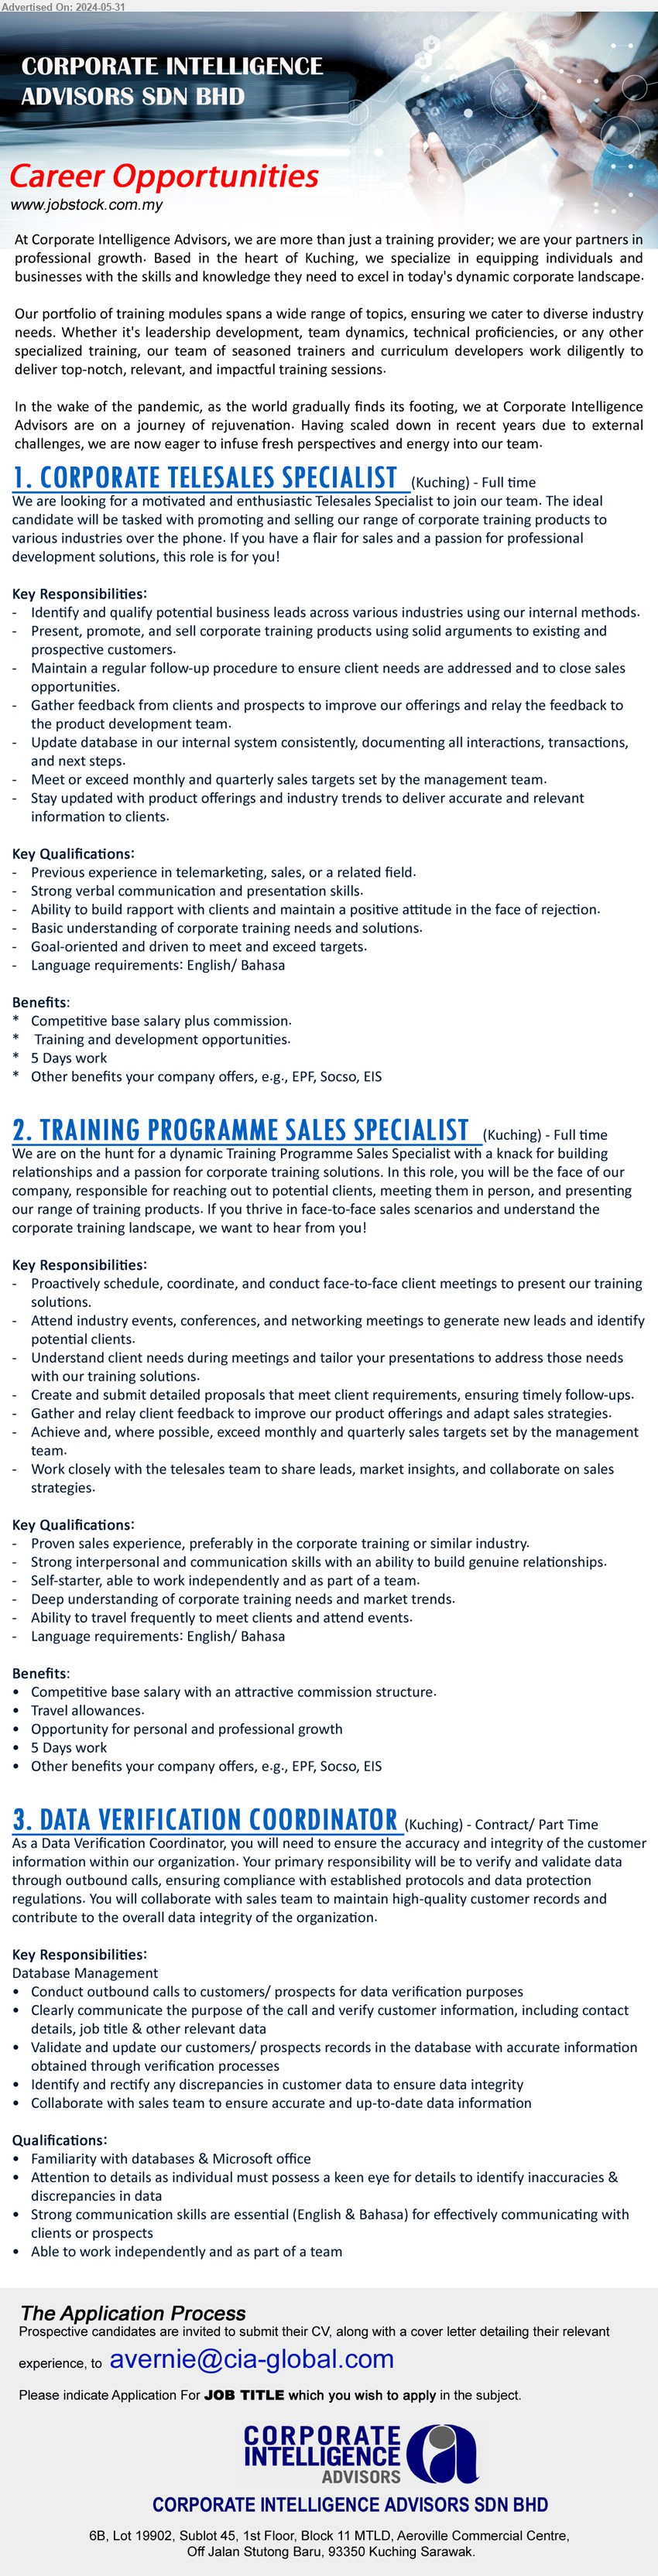 CORPORATE INTELLIGENCE ADVISORS SDN BHD - 1. CORPORATE TELESALES SPECIALIST   (Kuching), Previous experience in telemarketing, sales, or a related field, Strong verbal communication and presentation skills,...
2. TRAINING PROGRAMME SALES SPECIALIST (Kuching), Proven sales experience, preferably in the corporate training or similar industry, Strong interpersonal and communication skills with an ability to build genuine relationships,...
3. DATA VERIFICATION COORDINATOR (Kuching), Familiarity with databases & Microsoft office, Attention to details as individual must possess a keen eye for details to identify inaccuracies & discrepancies in data,...
Email resume to...